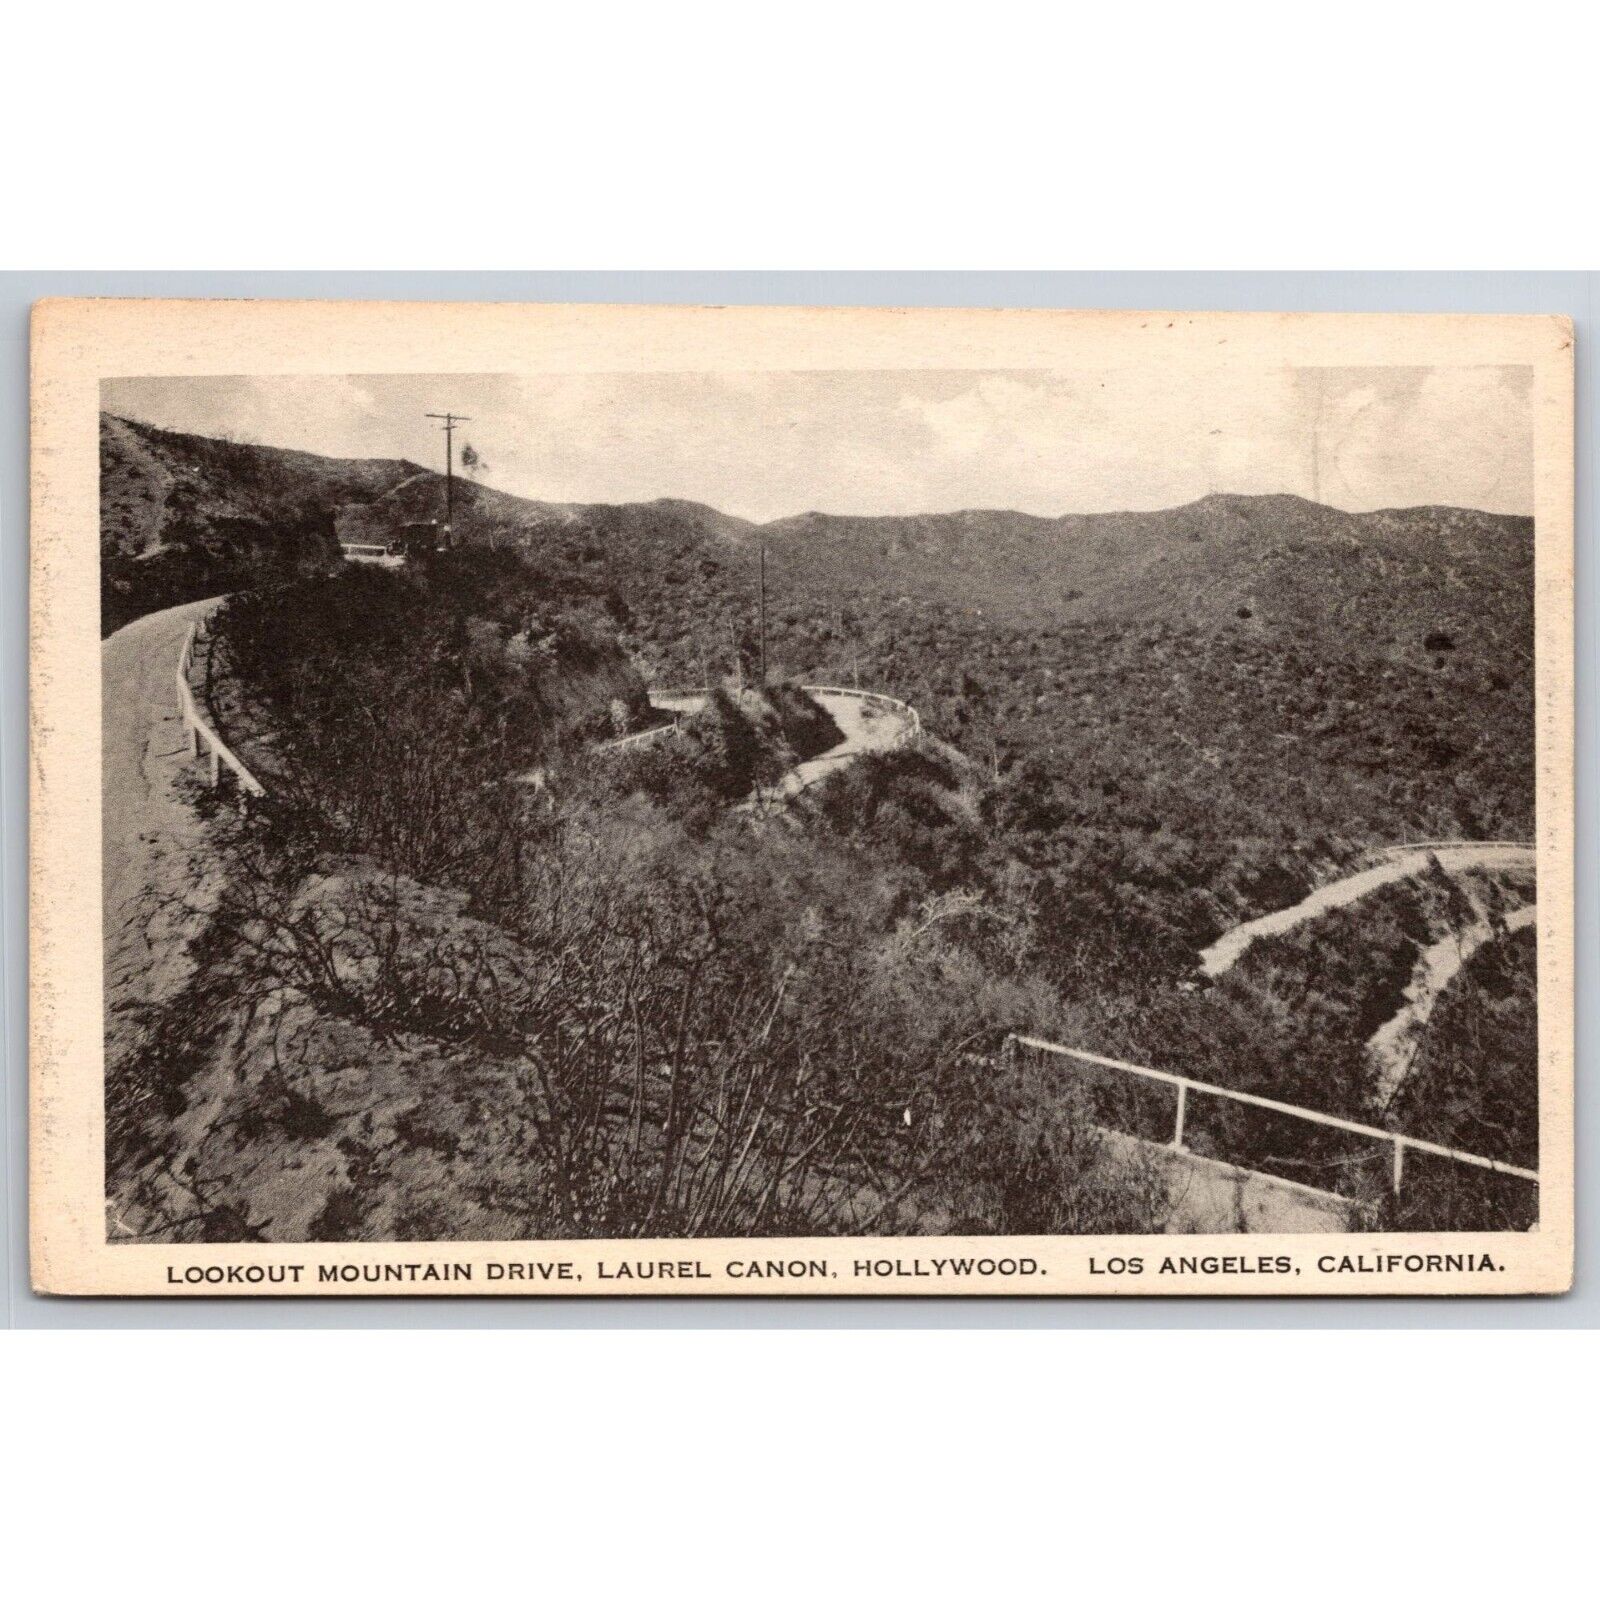 Postcard Lookout Mountain Drive Laurel Canon Hollywood Los Angeles CA 0683